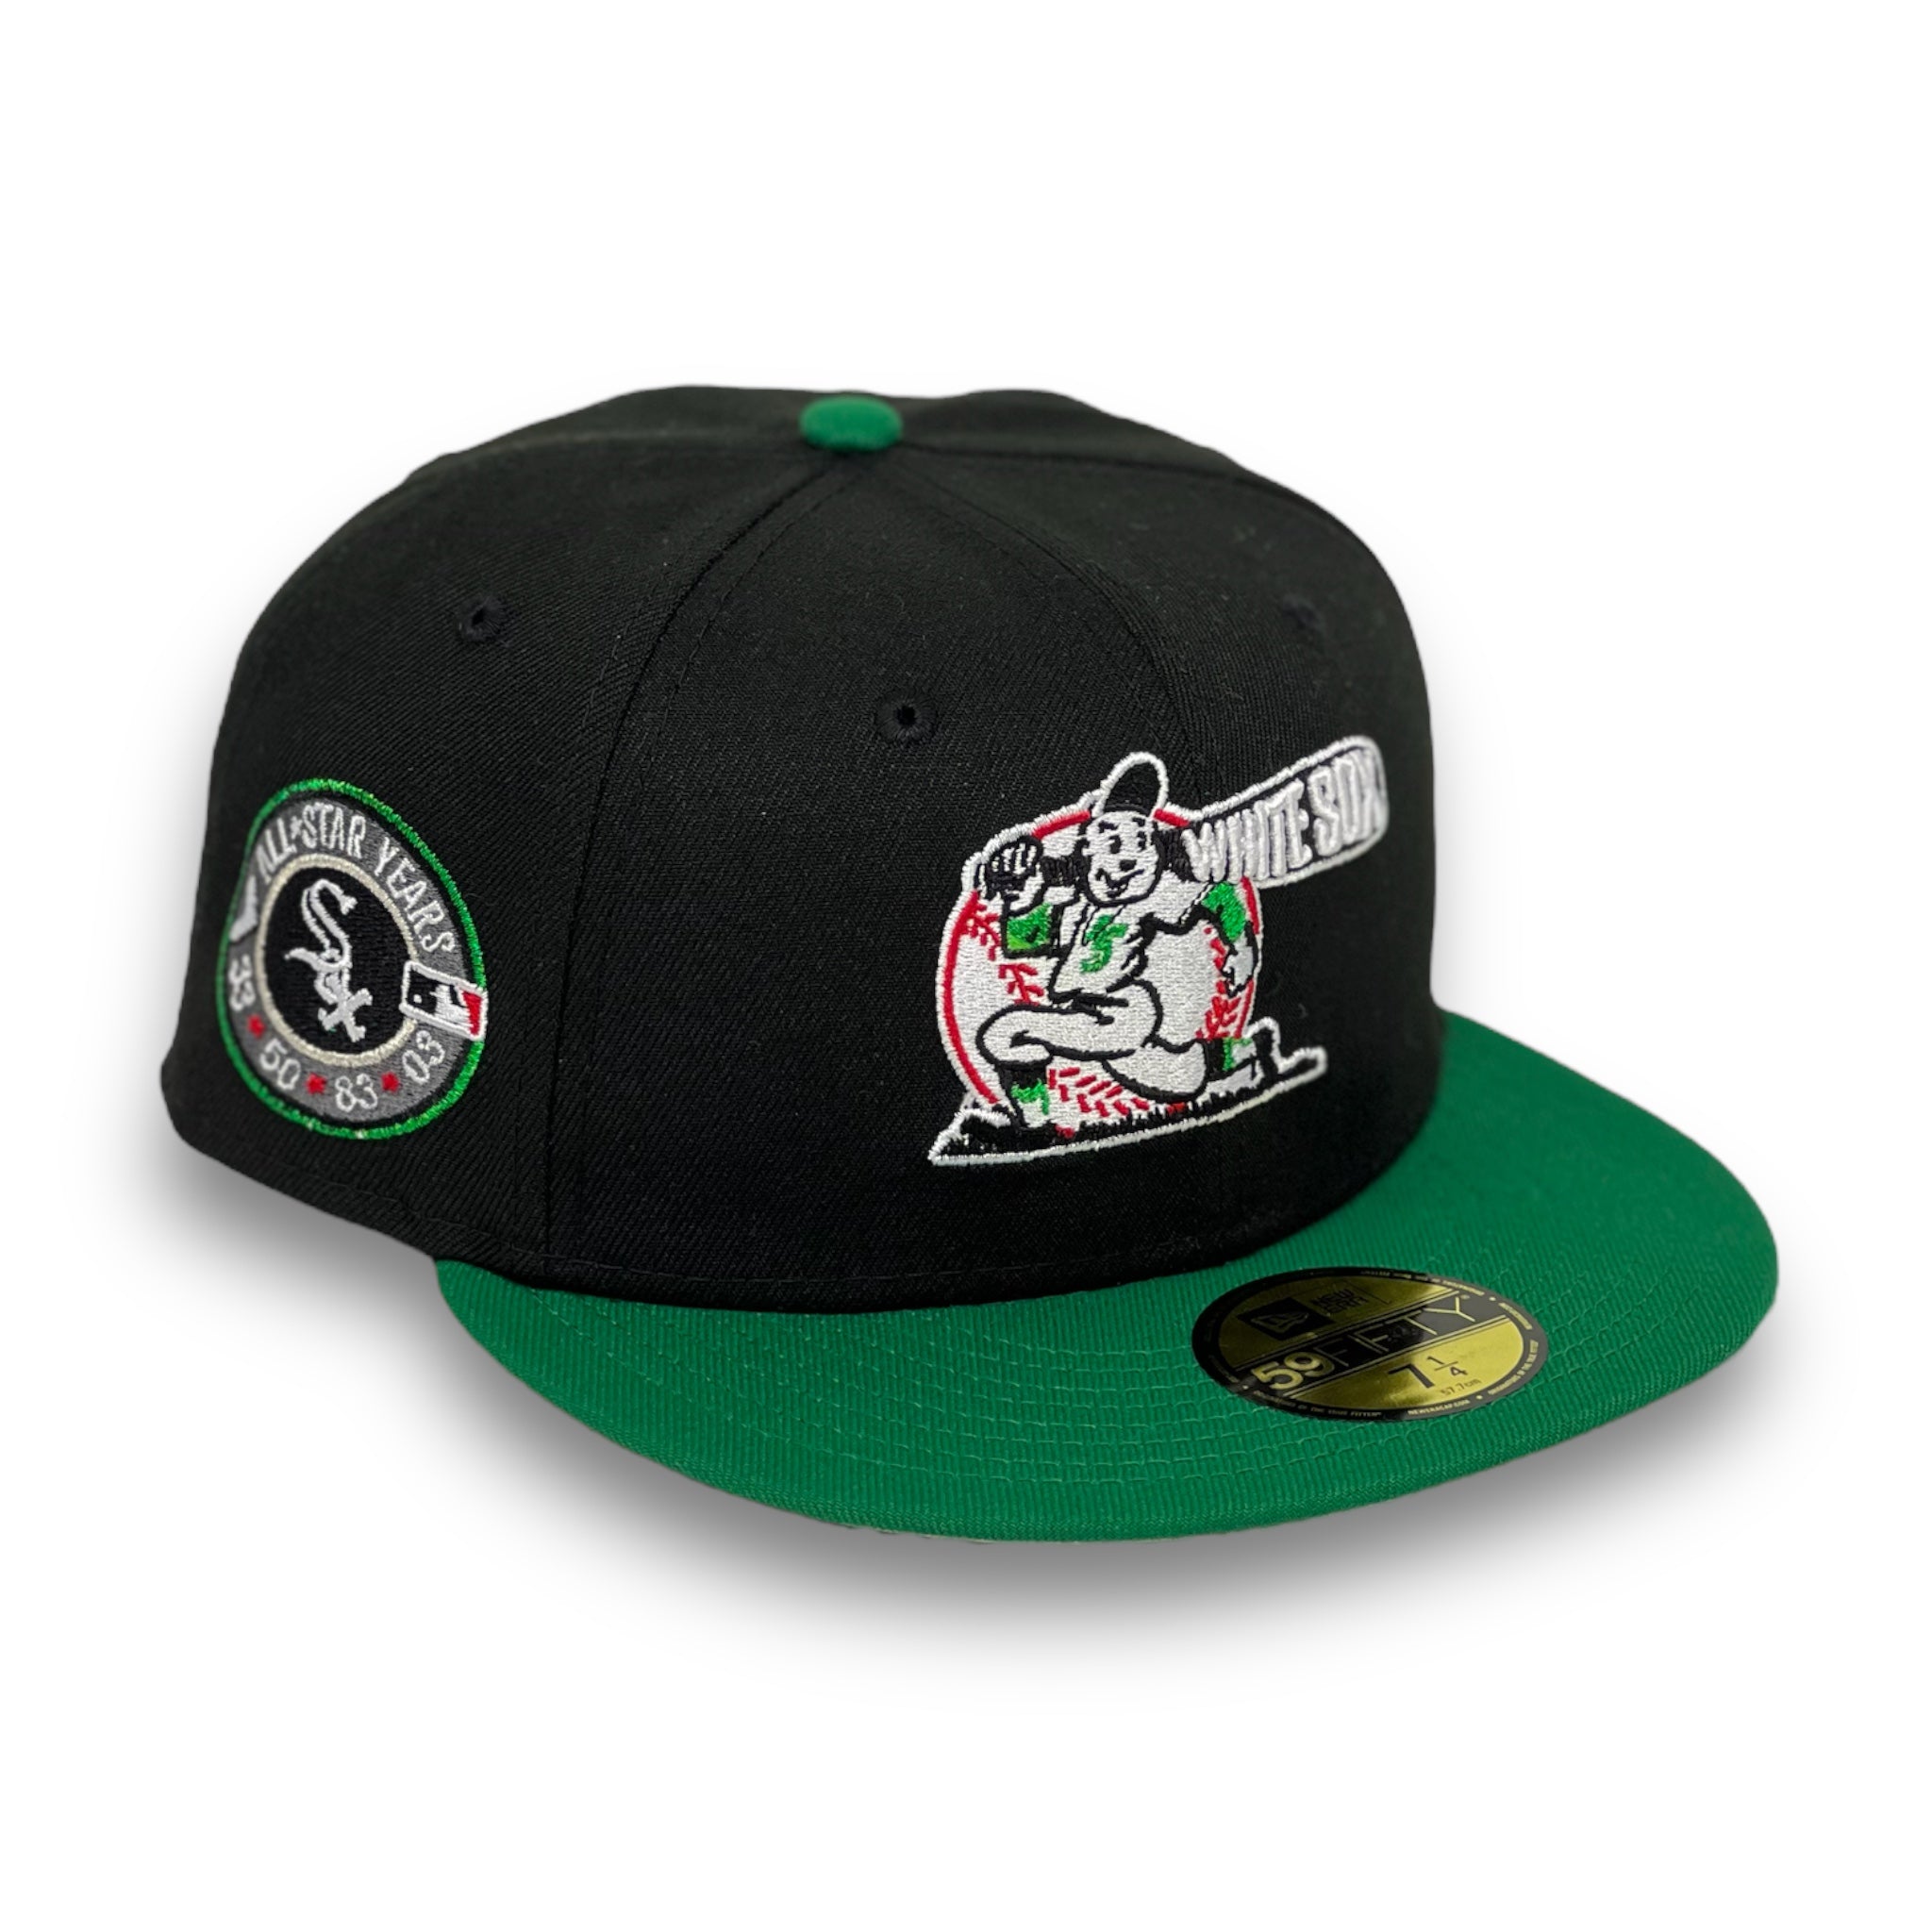 CHICAGO WHITESOX (ALLSTAR YEARS) NEW ERA 59FIFTY FITTED